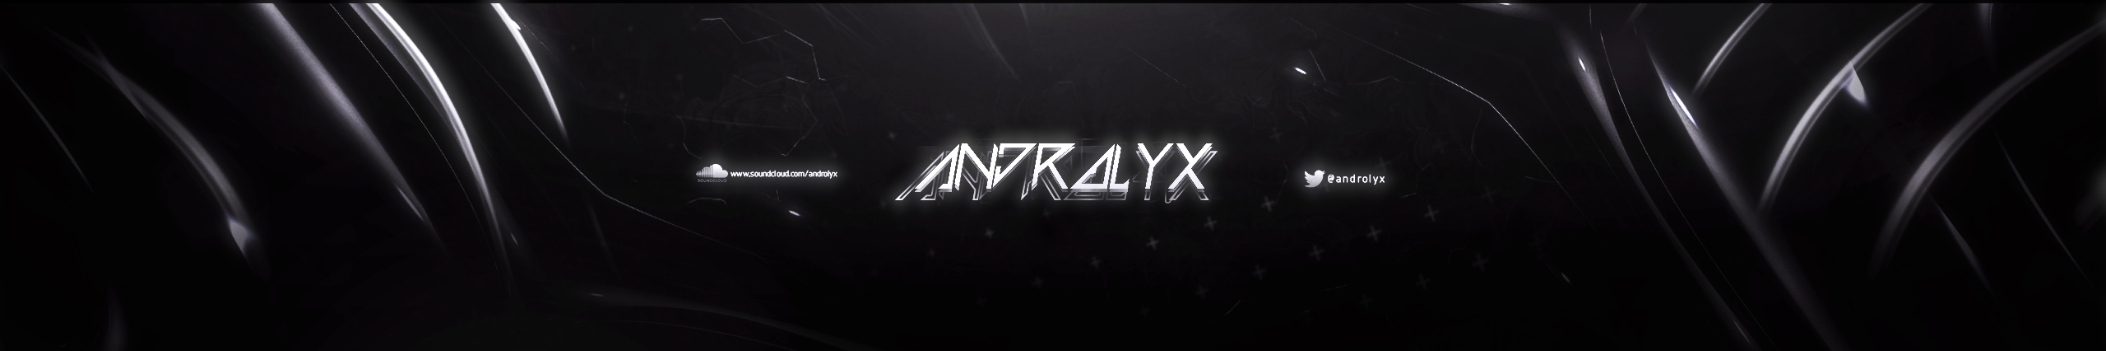 Androlyx